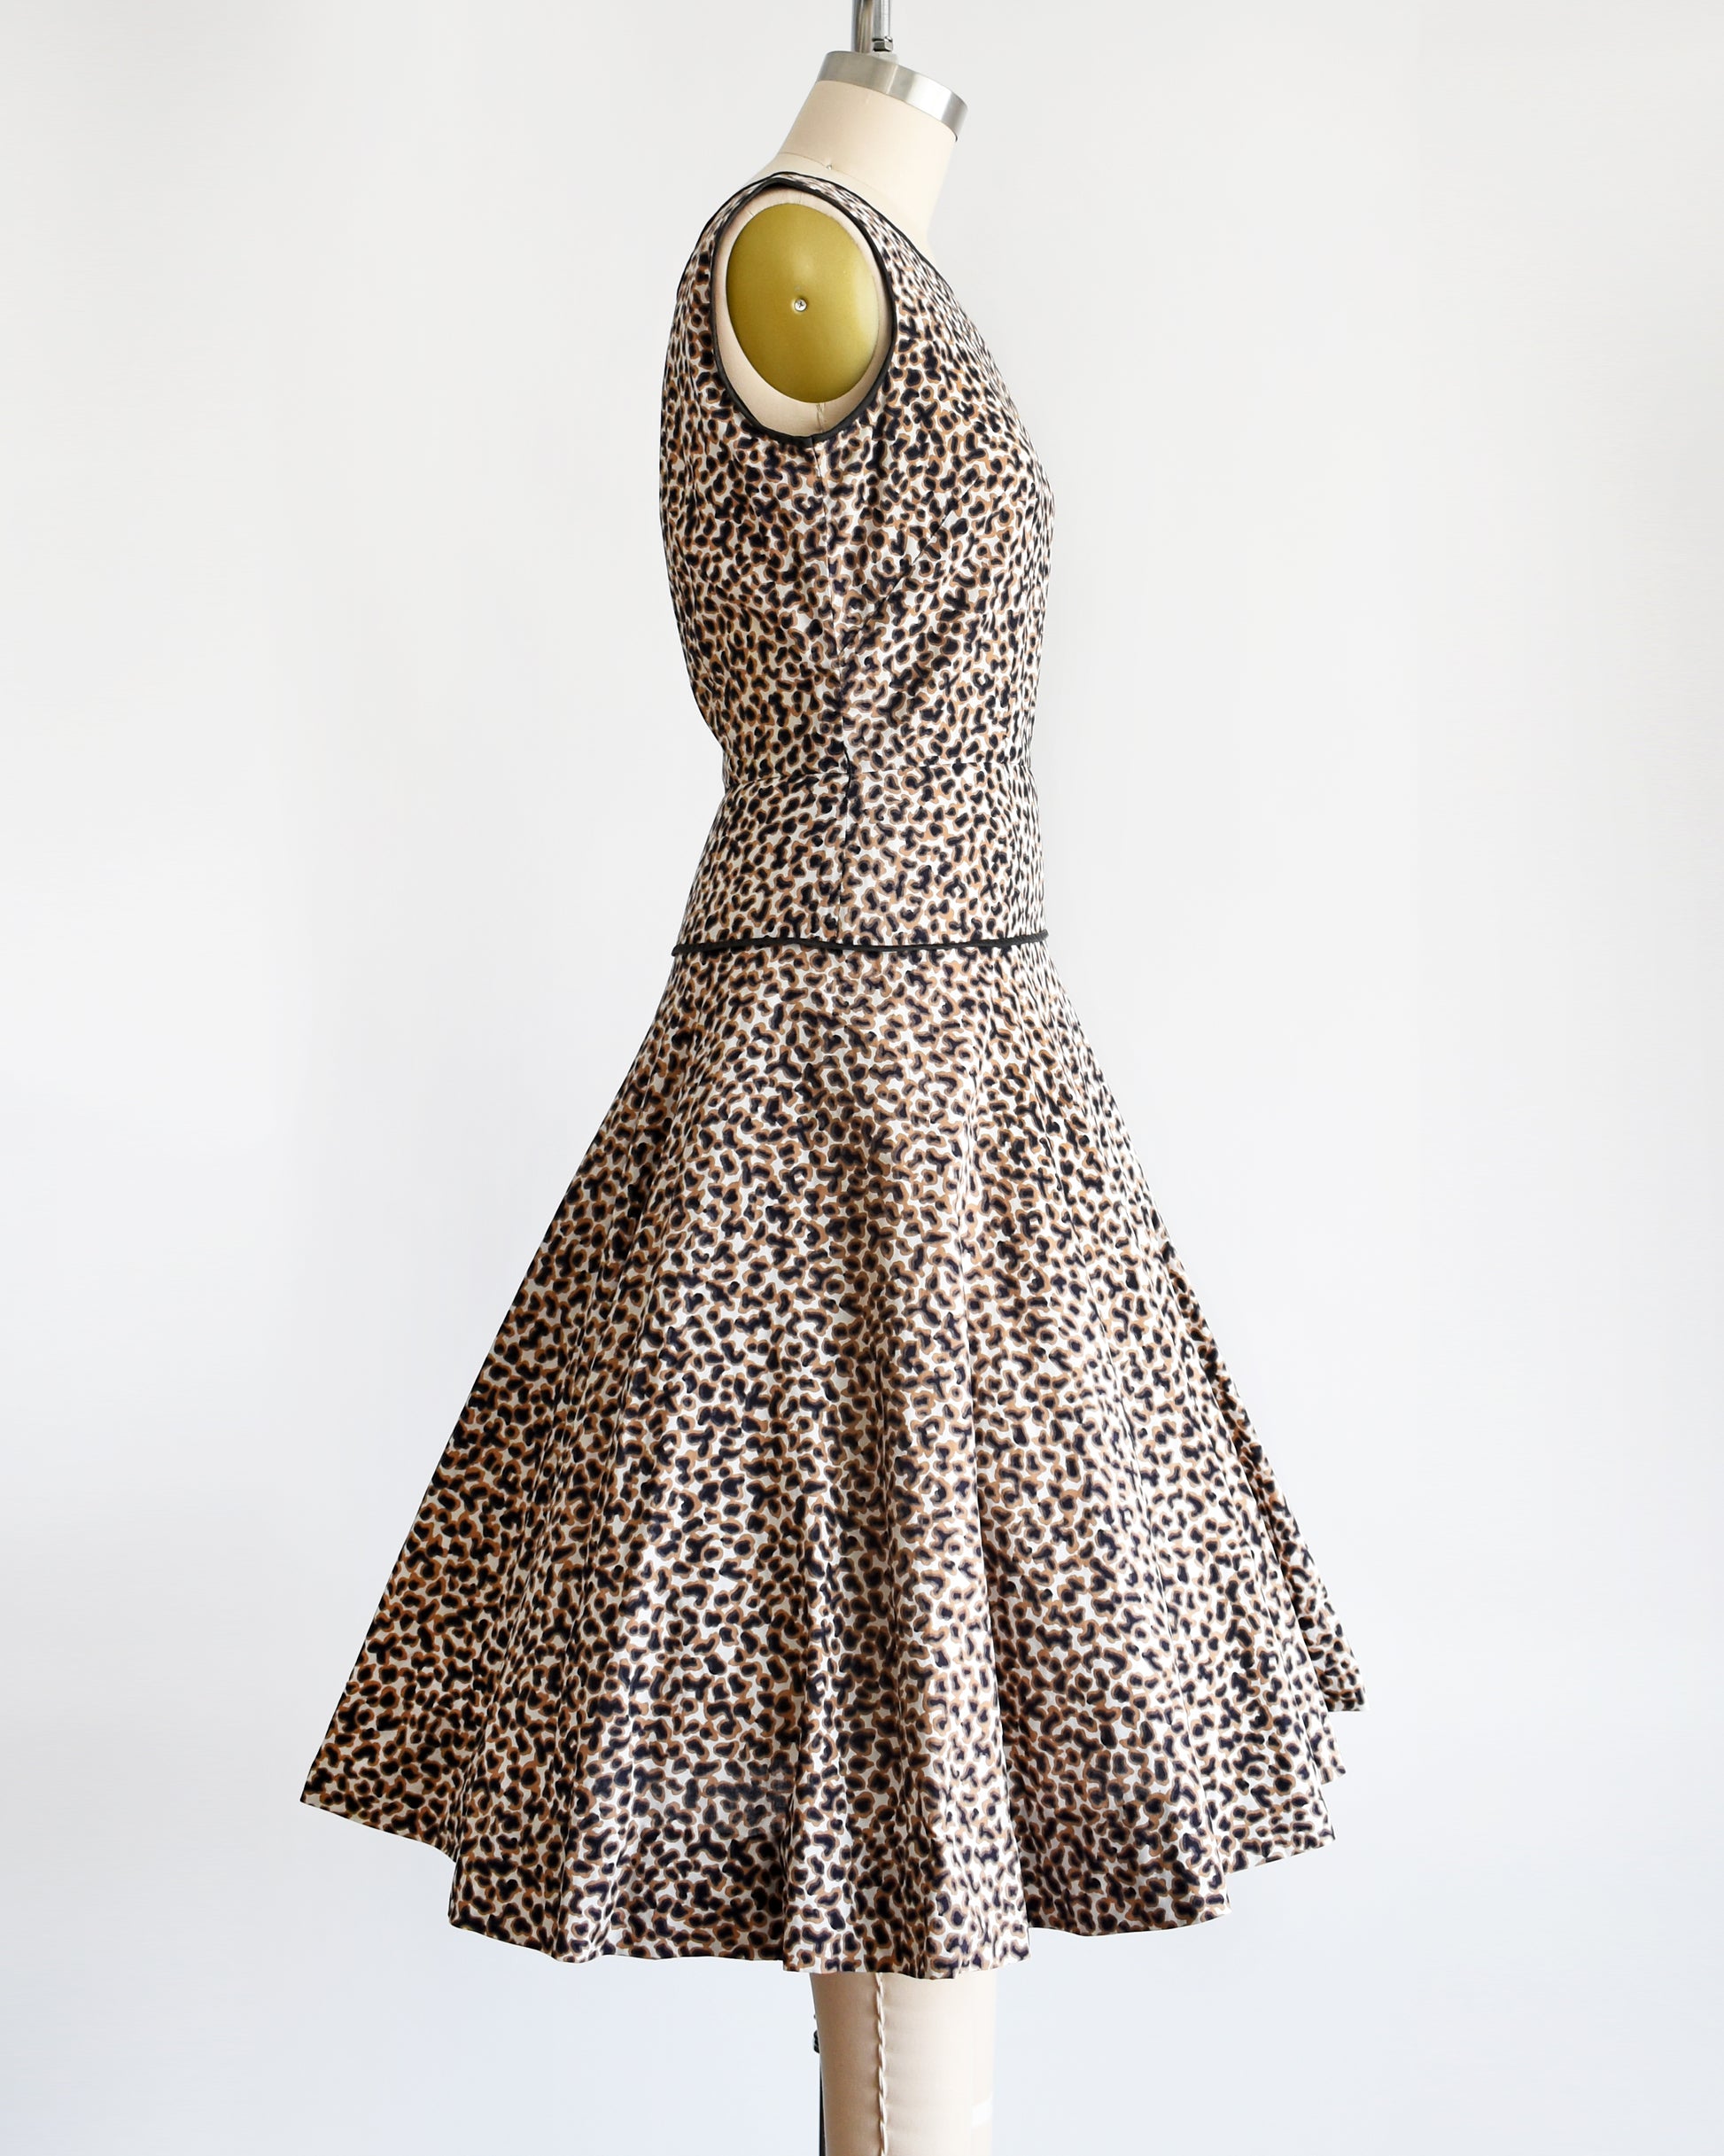 Side view of a vintage 1950s leopard print dress with black trim on a dress form.